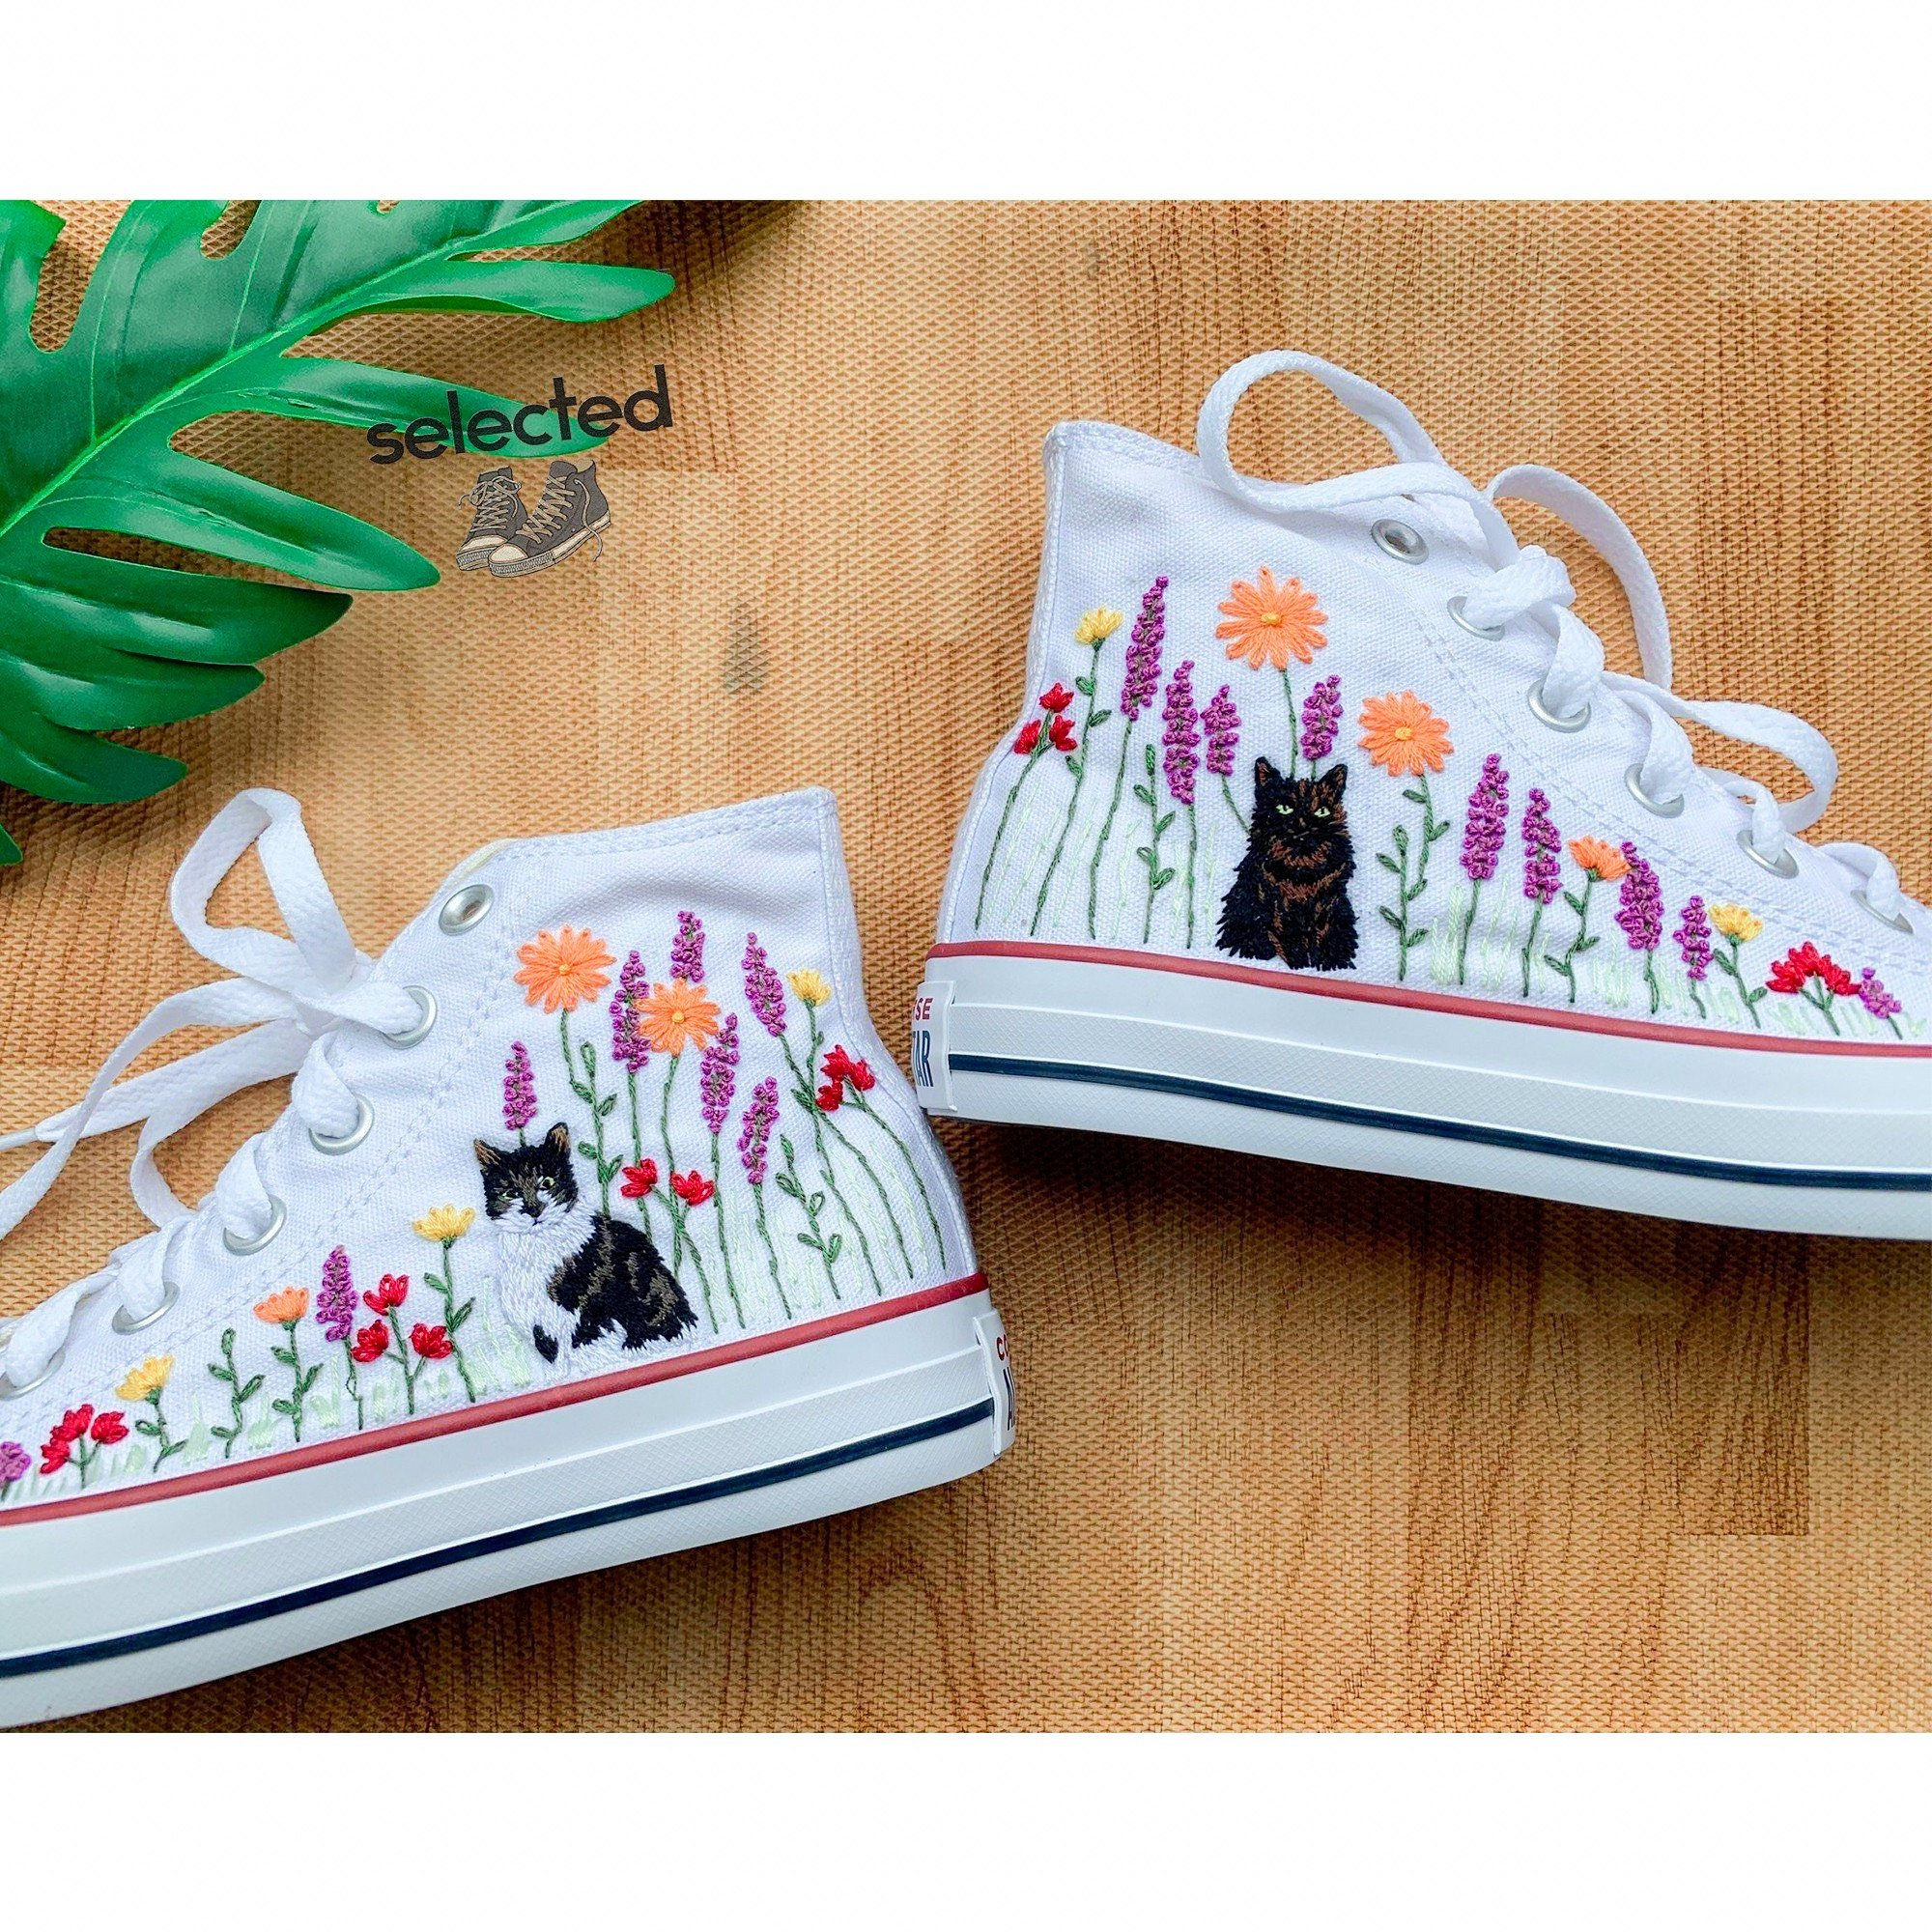 Personalized Embroidered Converse Shoes: Add Your Unique Style